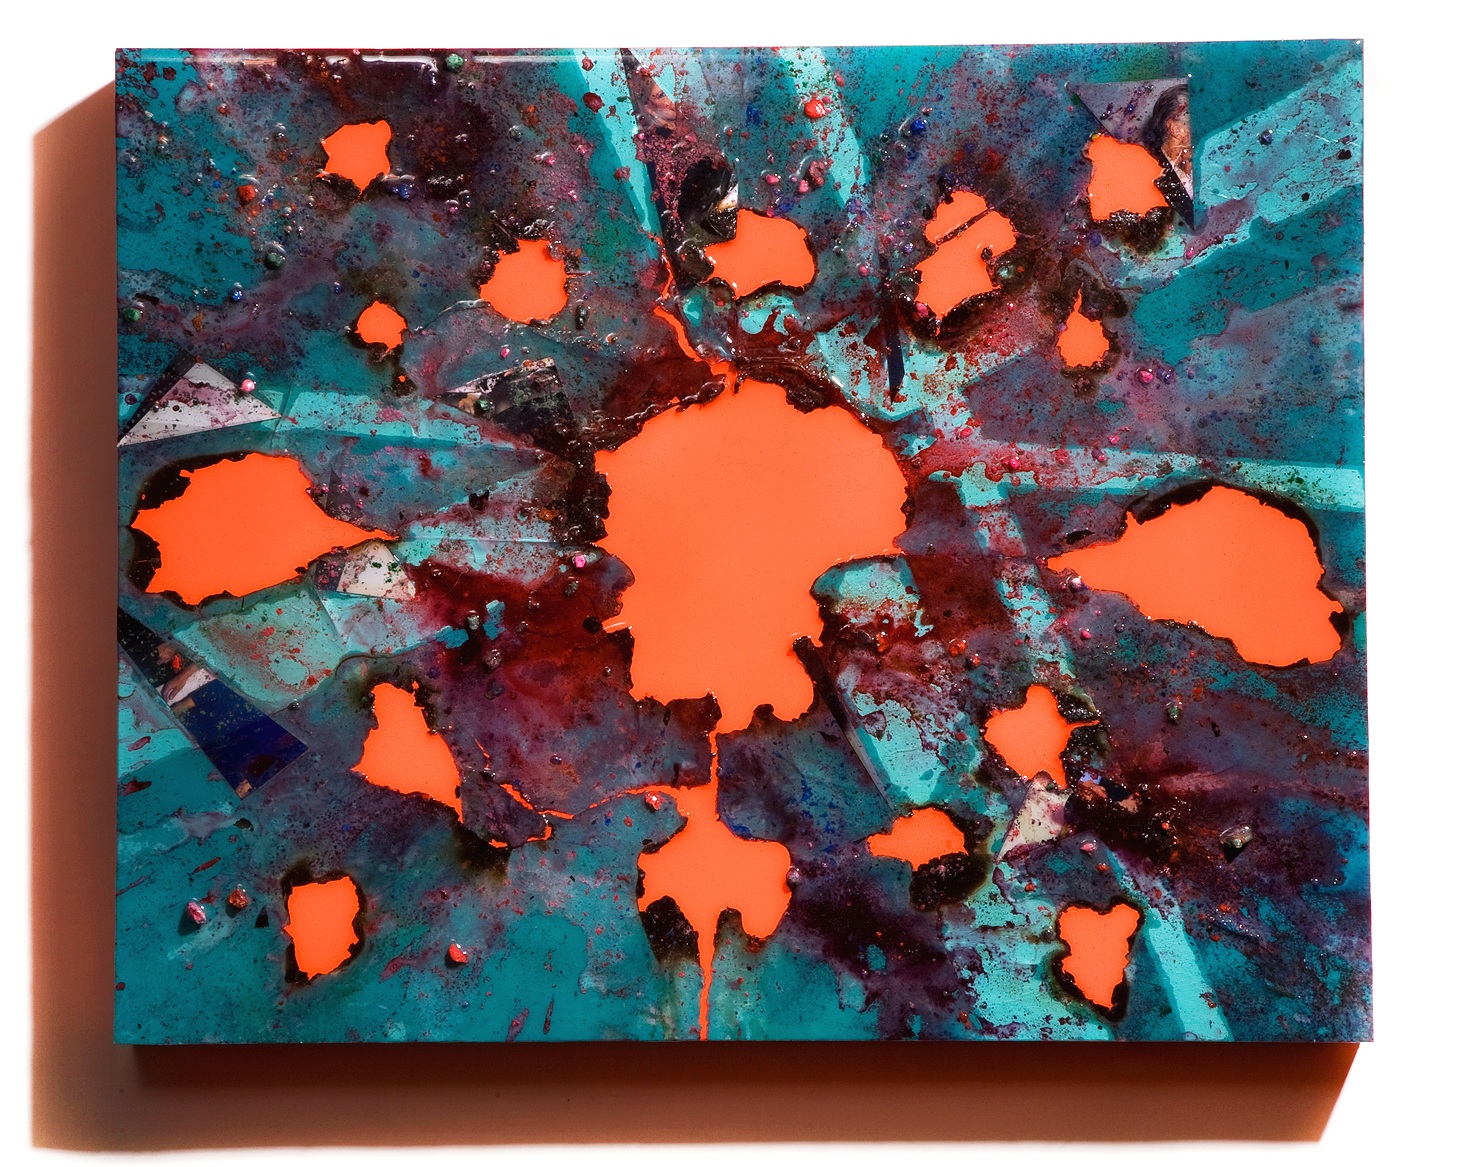 SERIE I, Untitled (teal/day-glo orange), photographs, photo background paper, chalk, spray paint, packing tape, powder drink, glue, epoxy resin on wood panel, 16"x20"x2", 2018